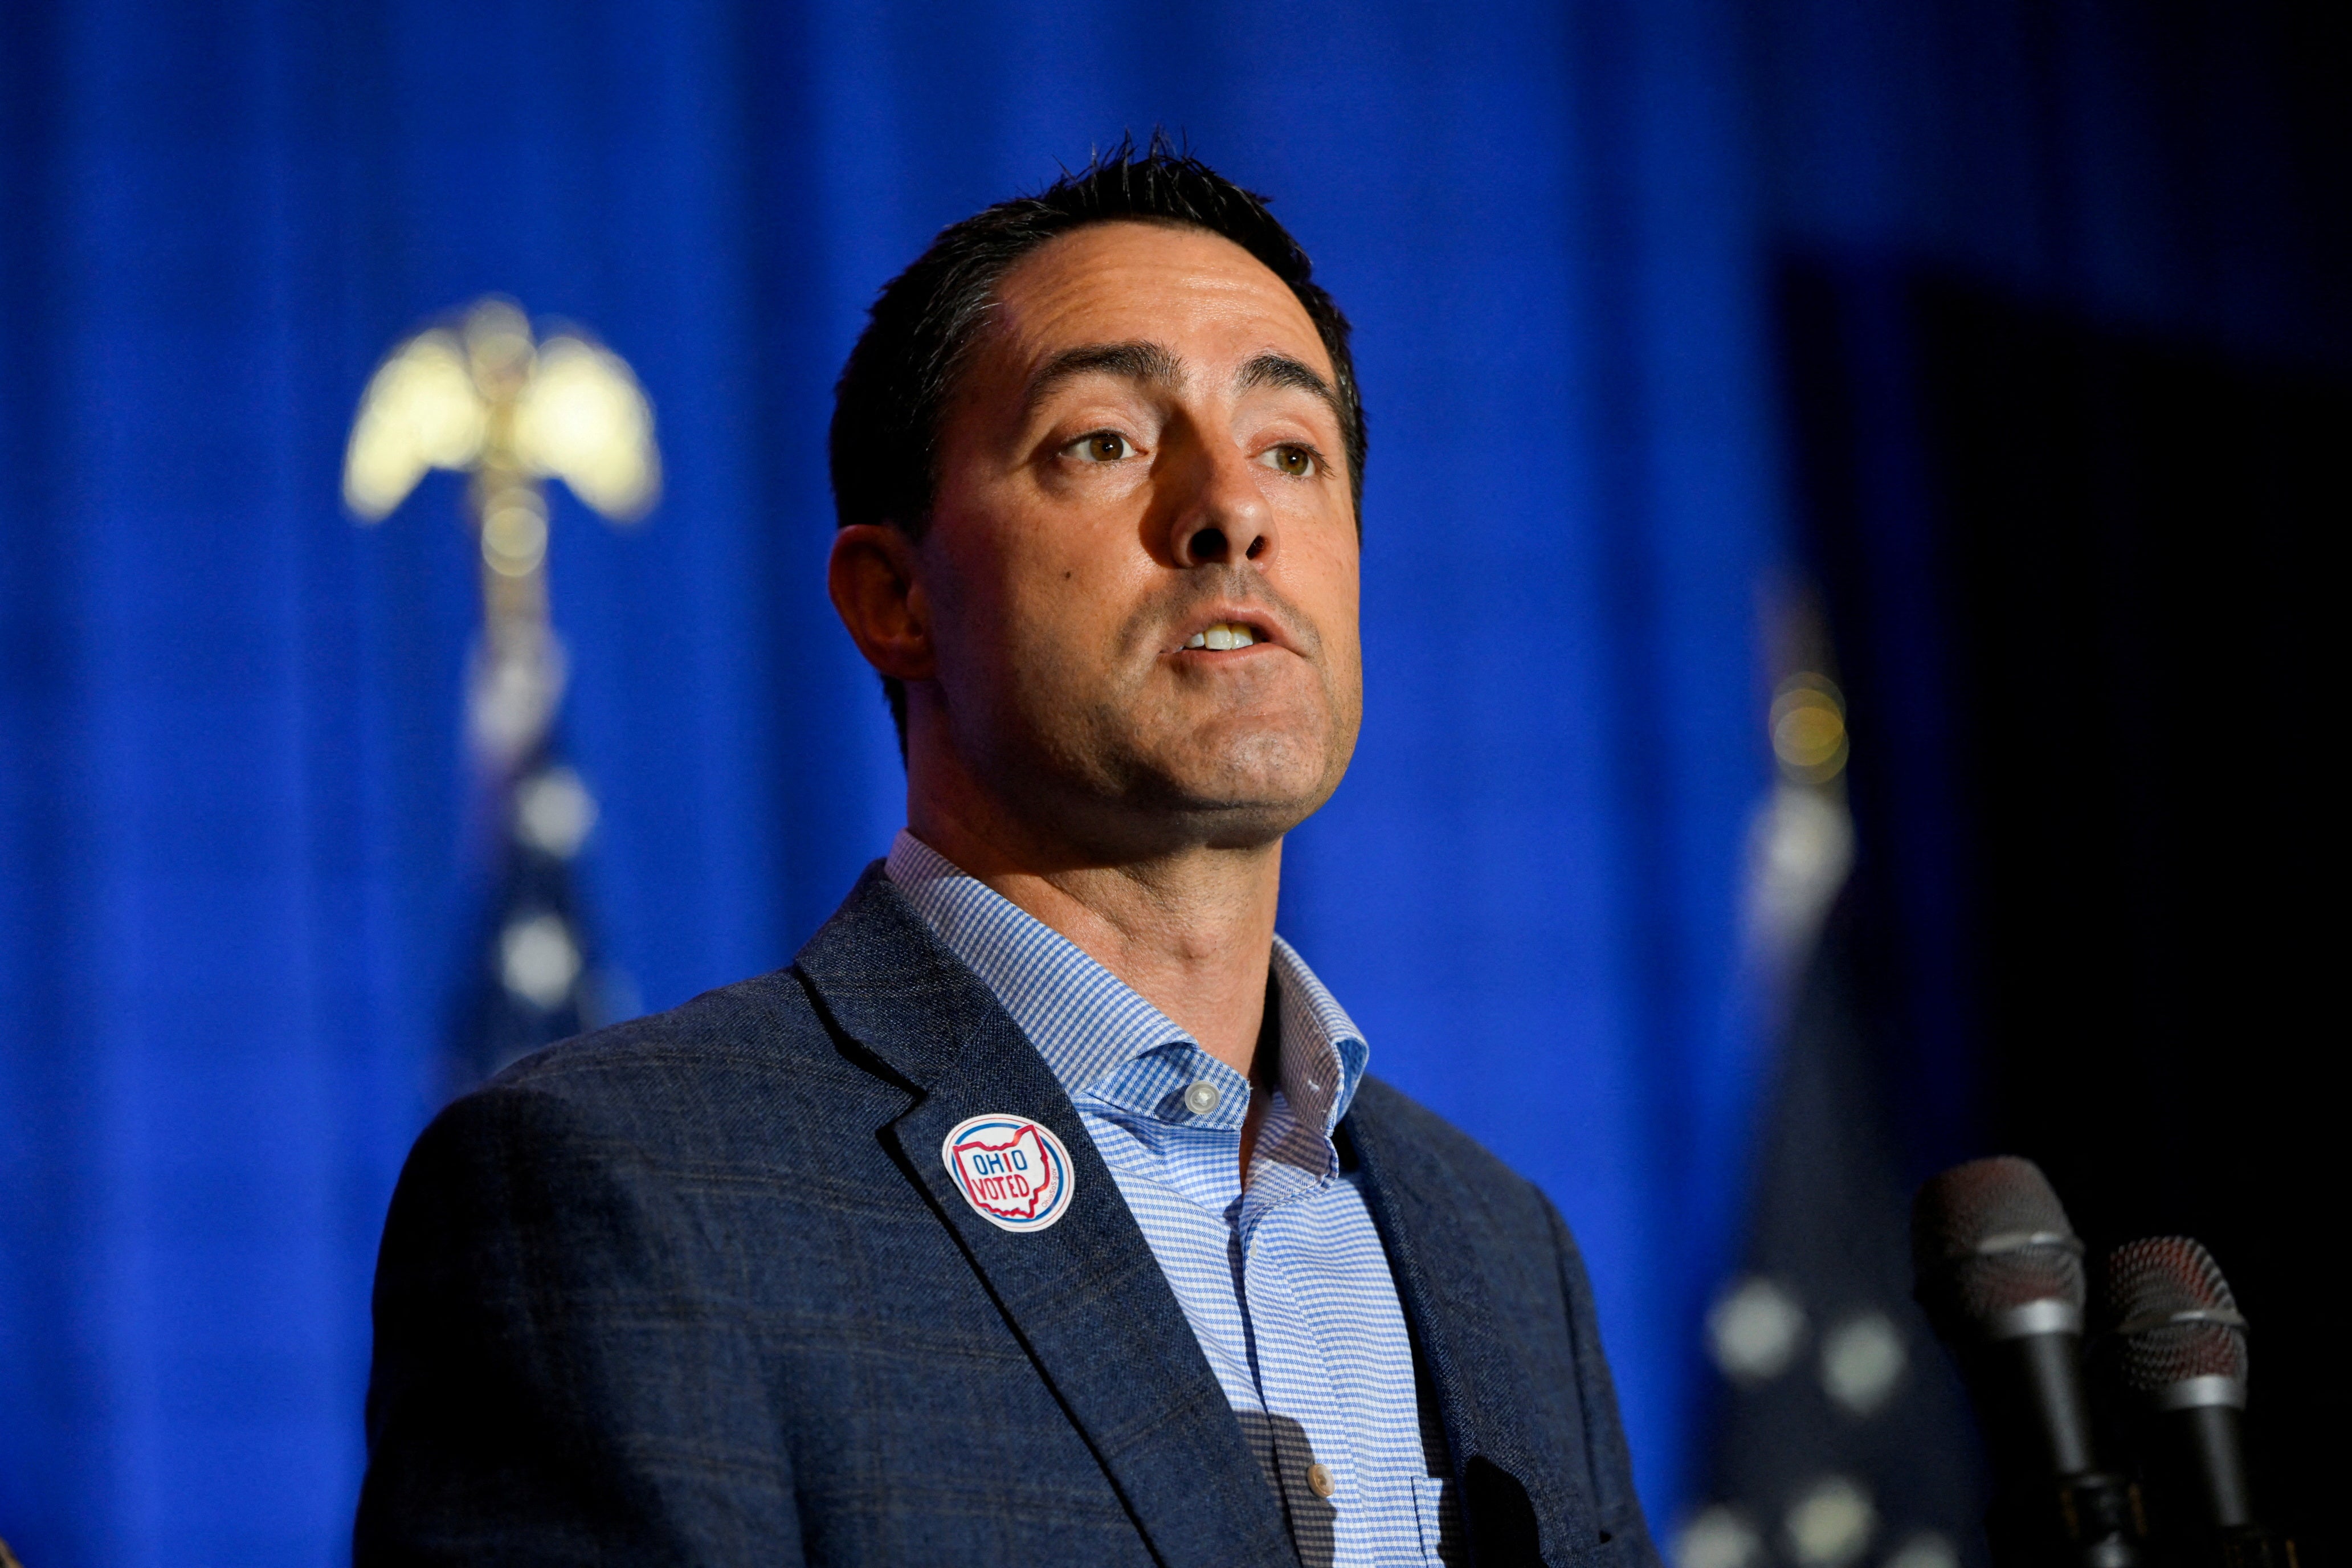 Candidate Frank LaRose has been the subject of smears by Moreno’s associates